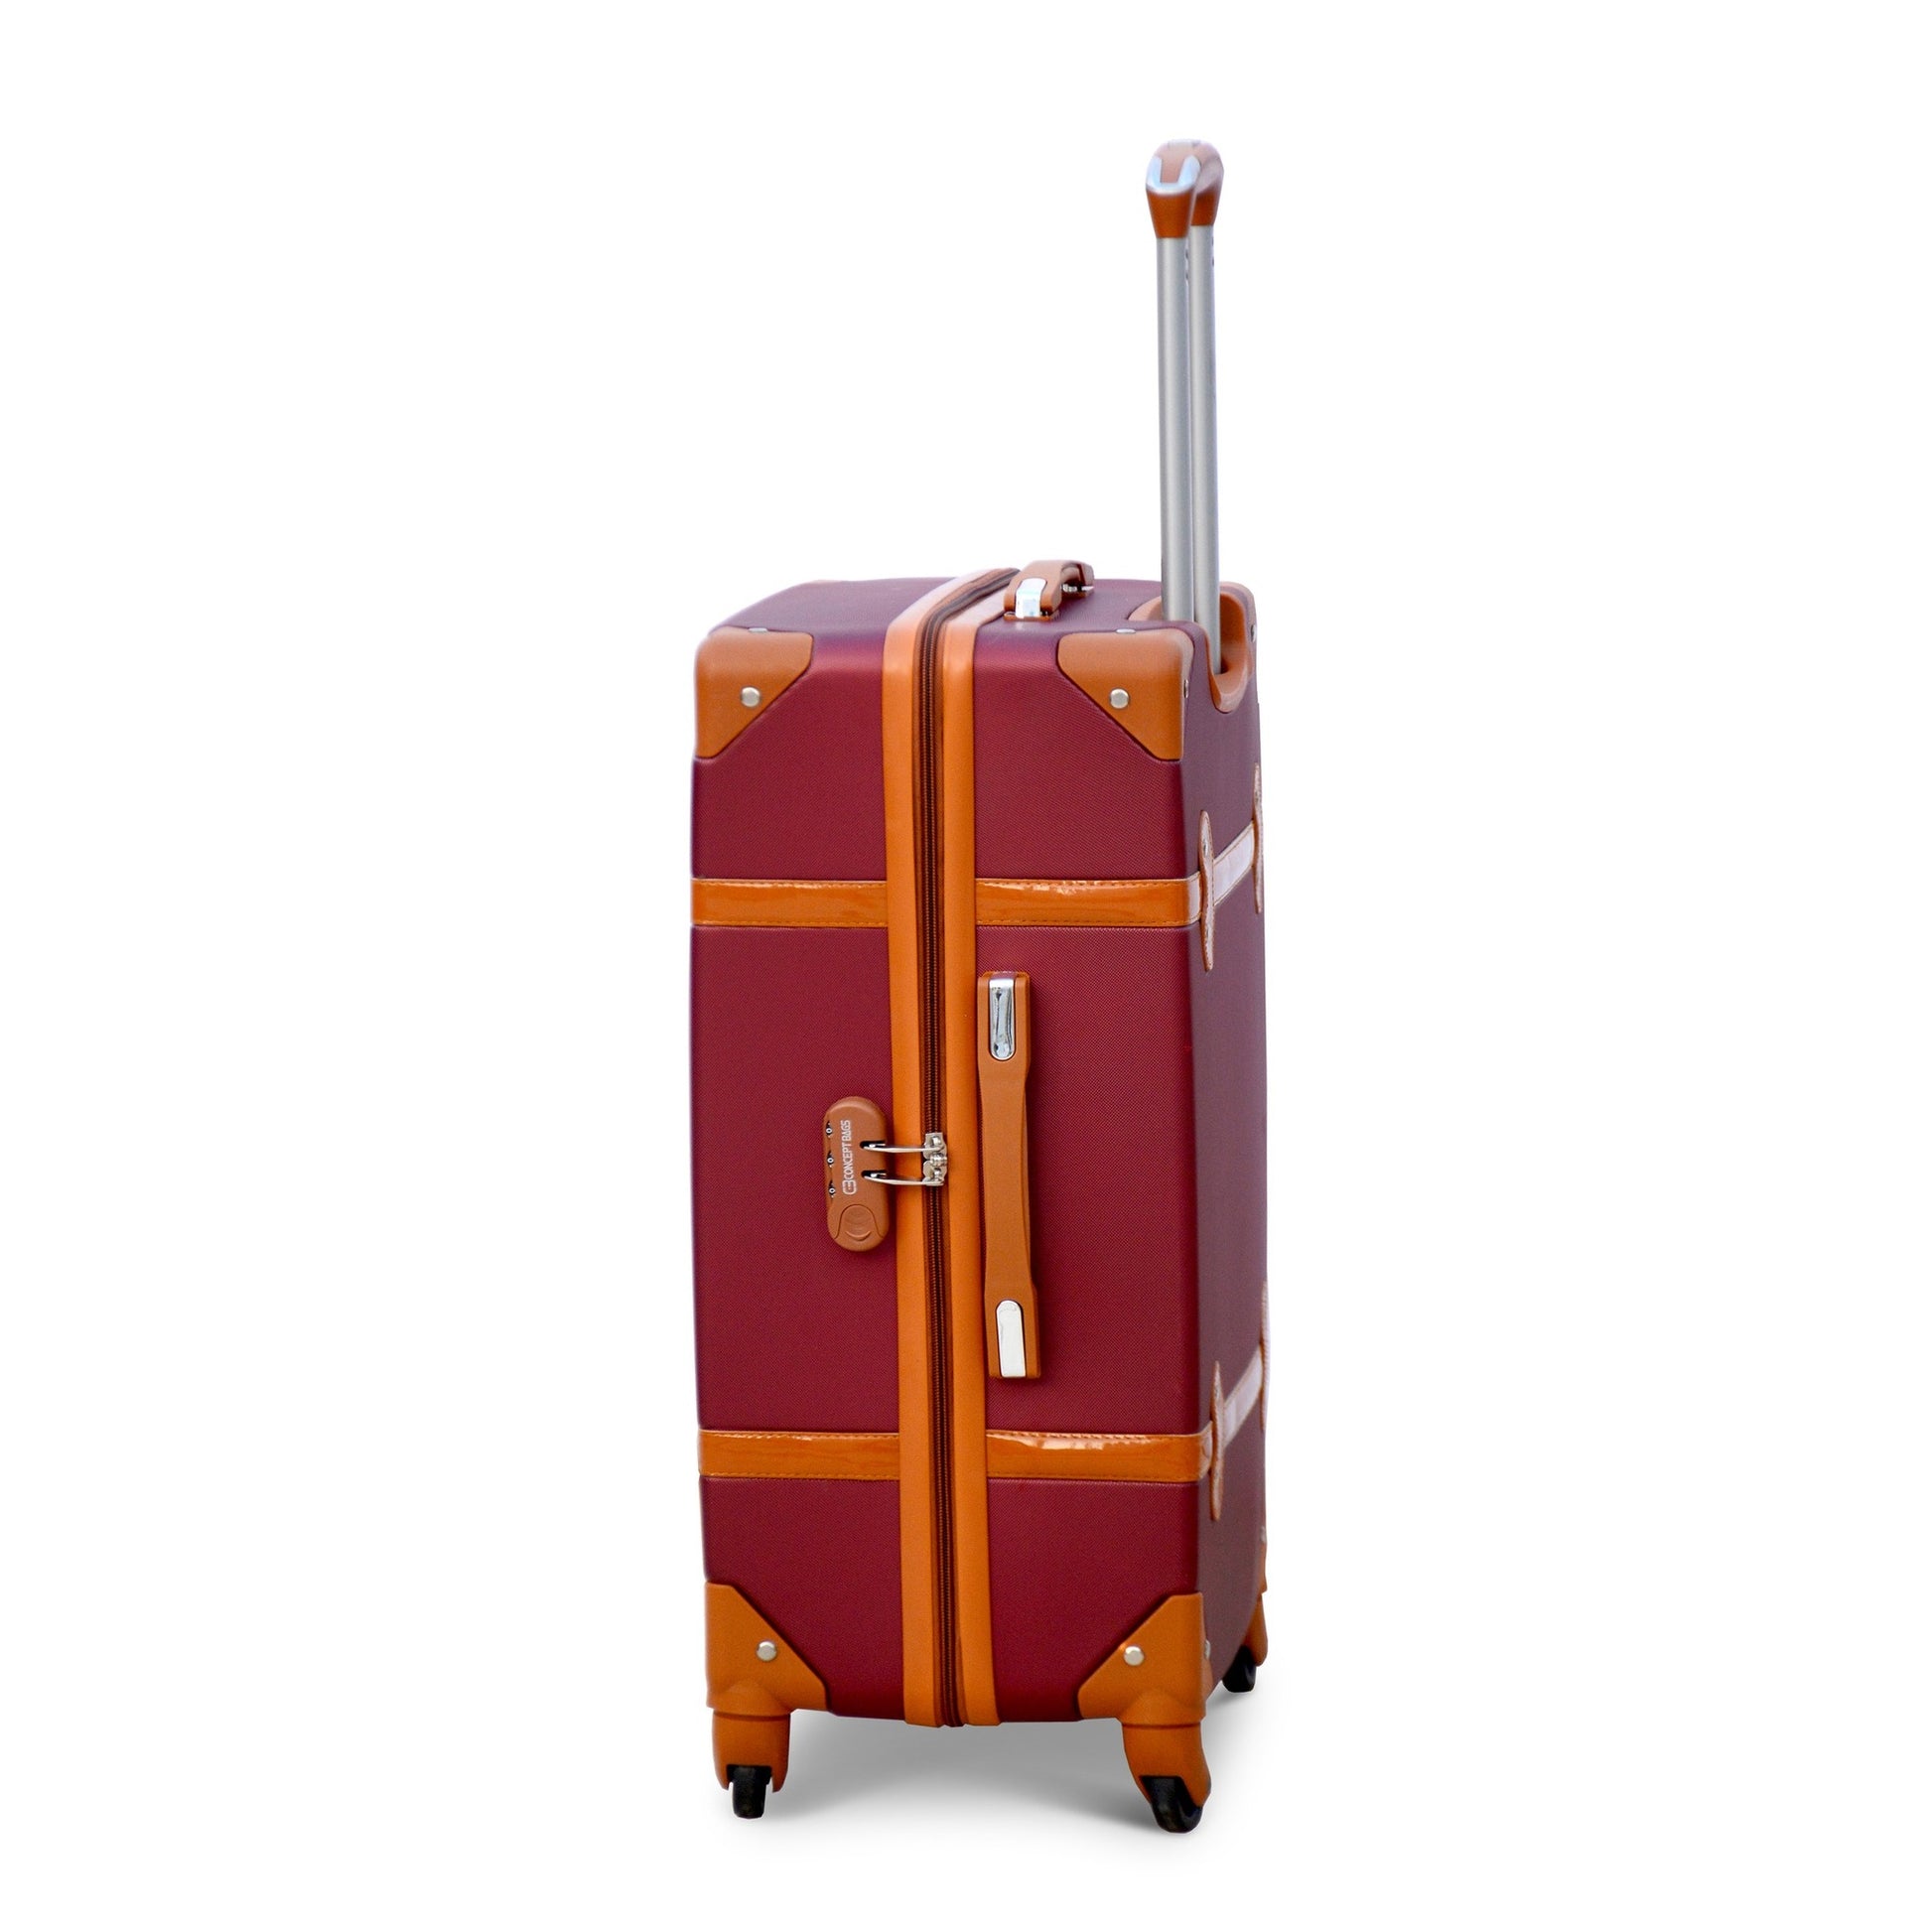 4 Piece Set 7” 20” 24” 28 inches Burgundy Colour Corner Guard ABS Lightweight Luggage With Spinner Wheel Zaappy.com